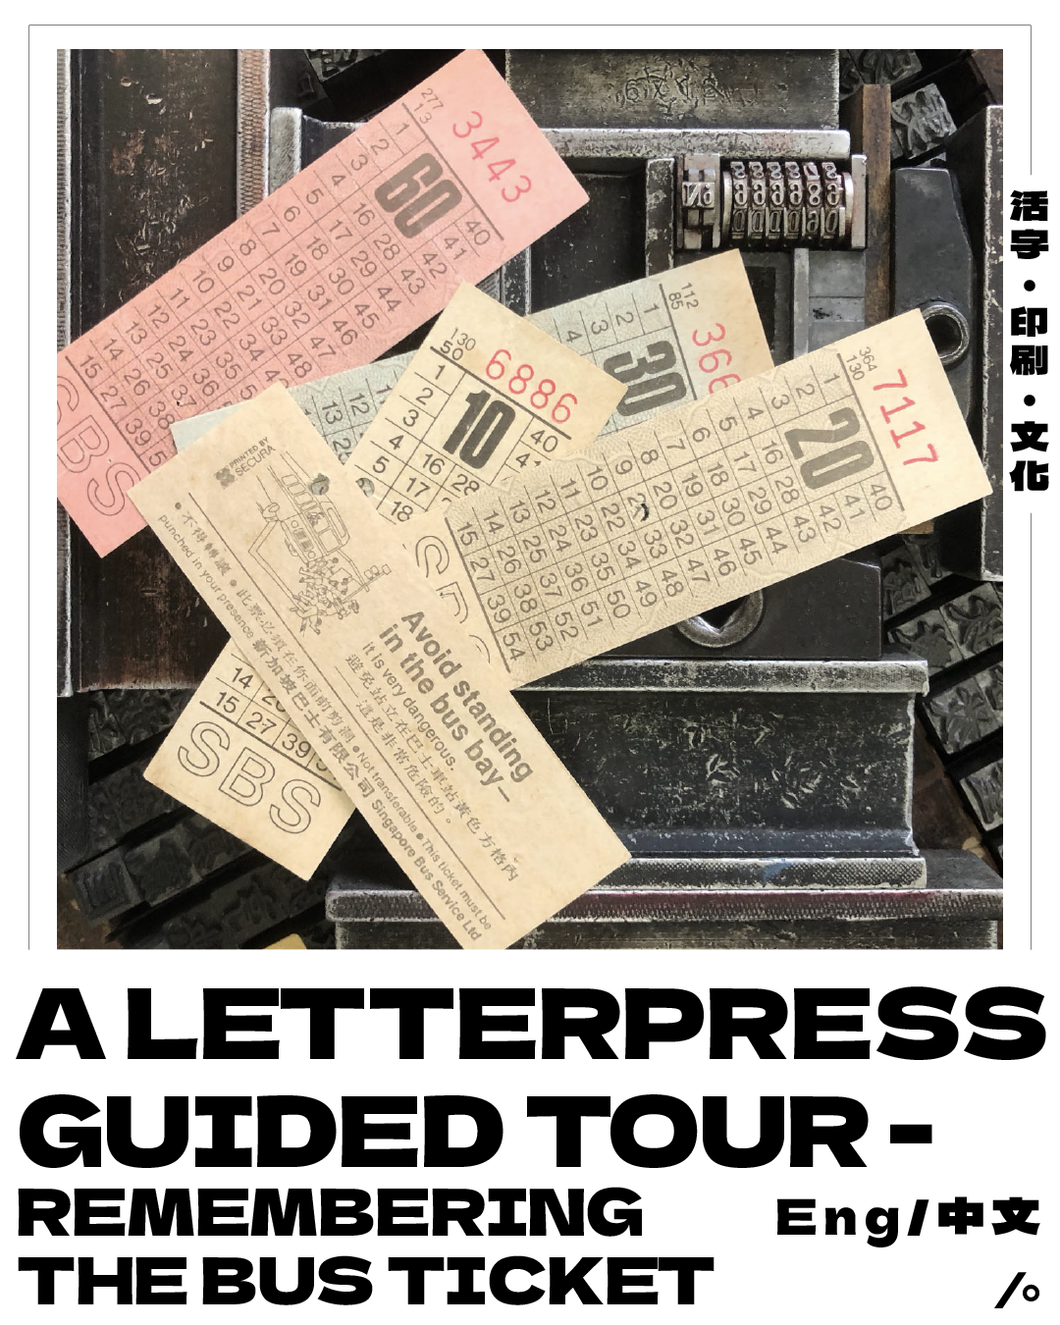 J -  Letterpress guided tour - Remembering the bus ticket/记忆中的巴士车票(Eng/Chn)